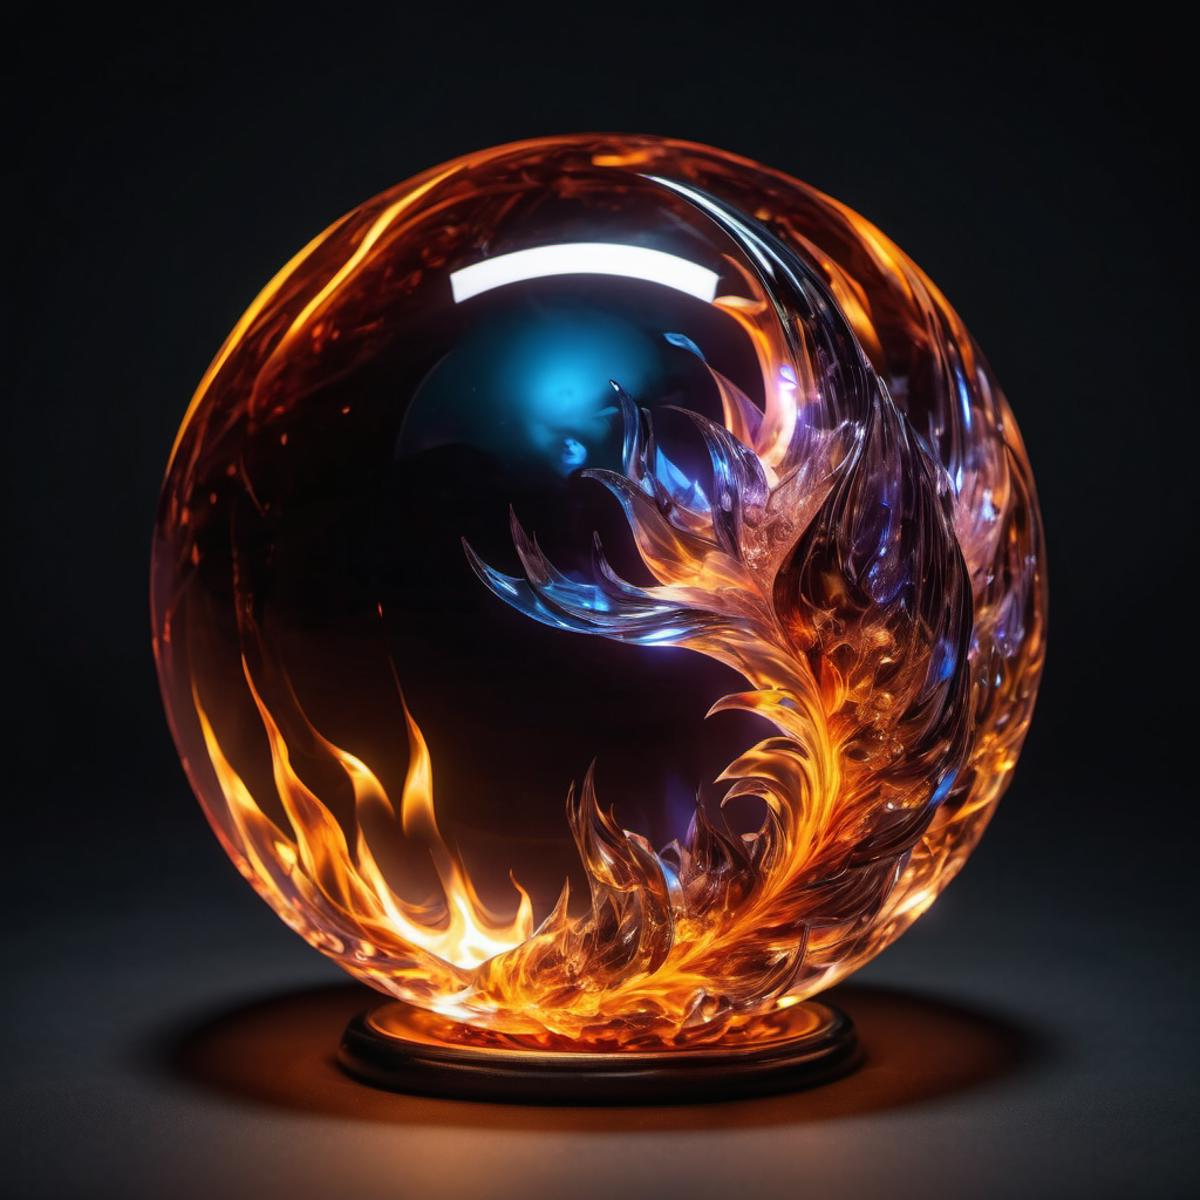 A Glass Sphere with a Fire and Water Design